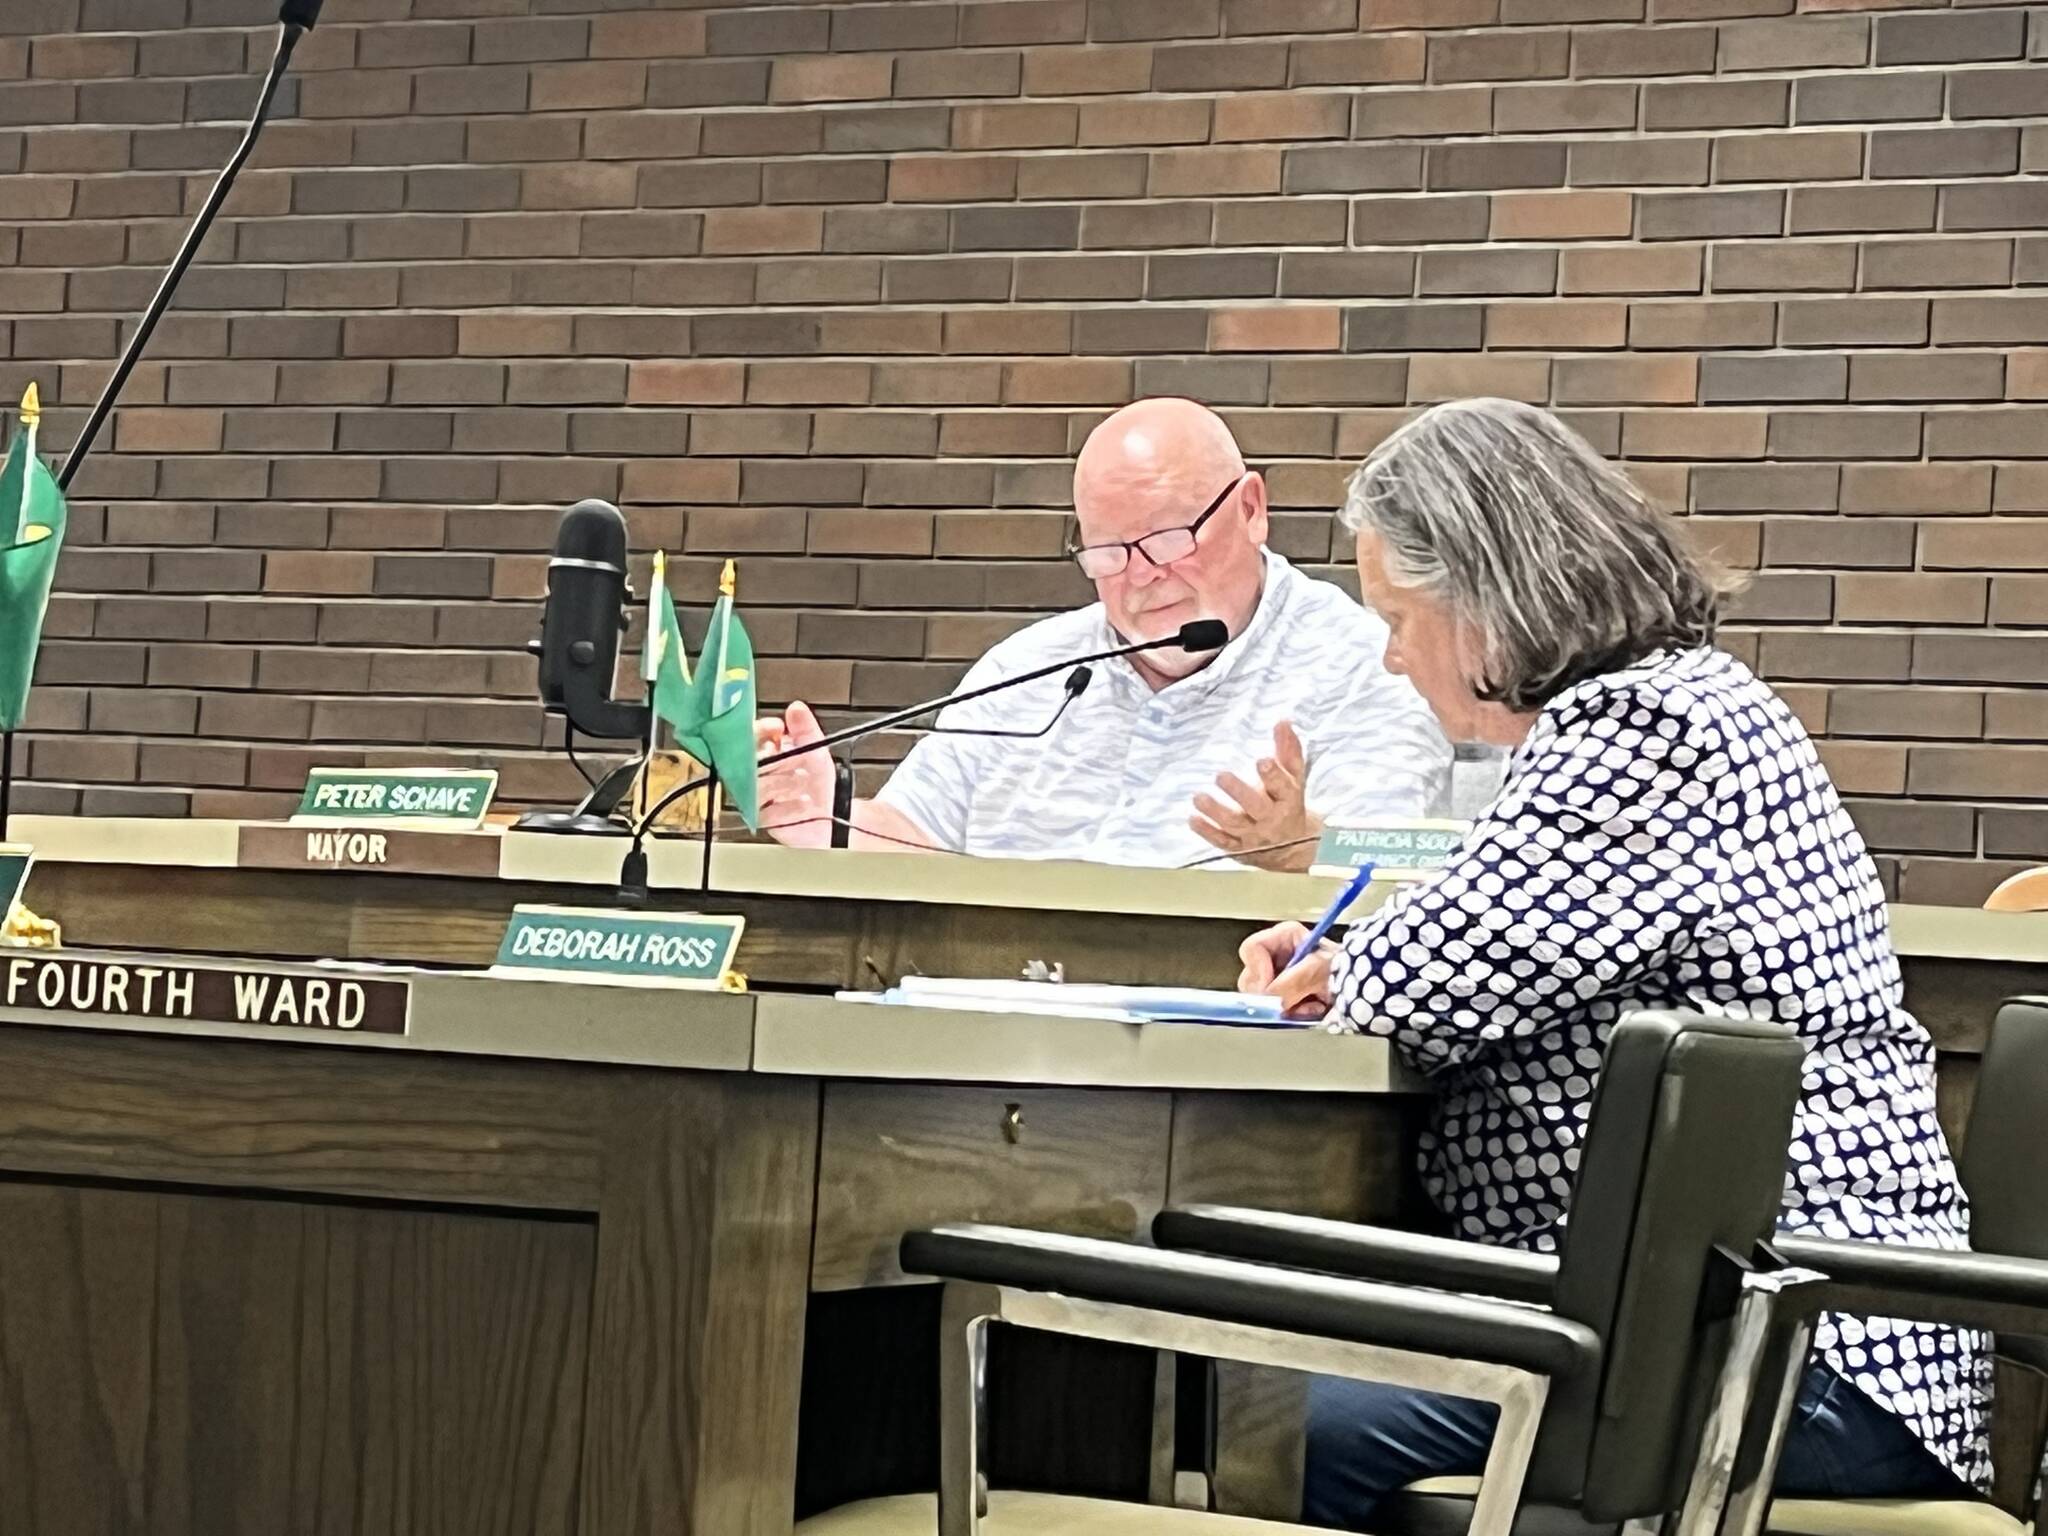 Mayor Pete Schave talks during the Aberdeen City Council meeting on Wednesday night, Aug. 11, 2022, while Ward 4 Position 8 council member Deborah Ross focuses in. (Matthew N. Wells | The Daily World)